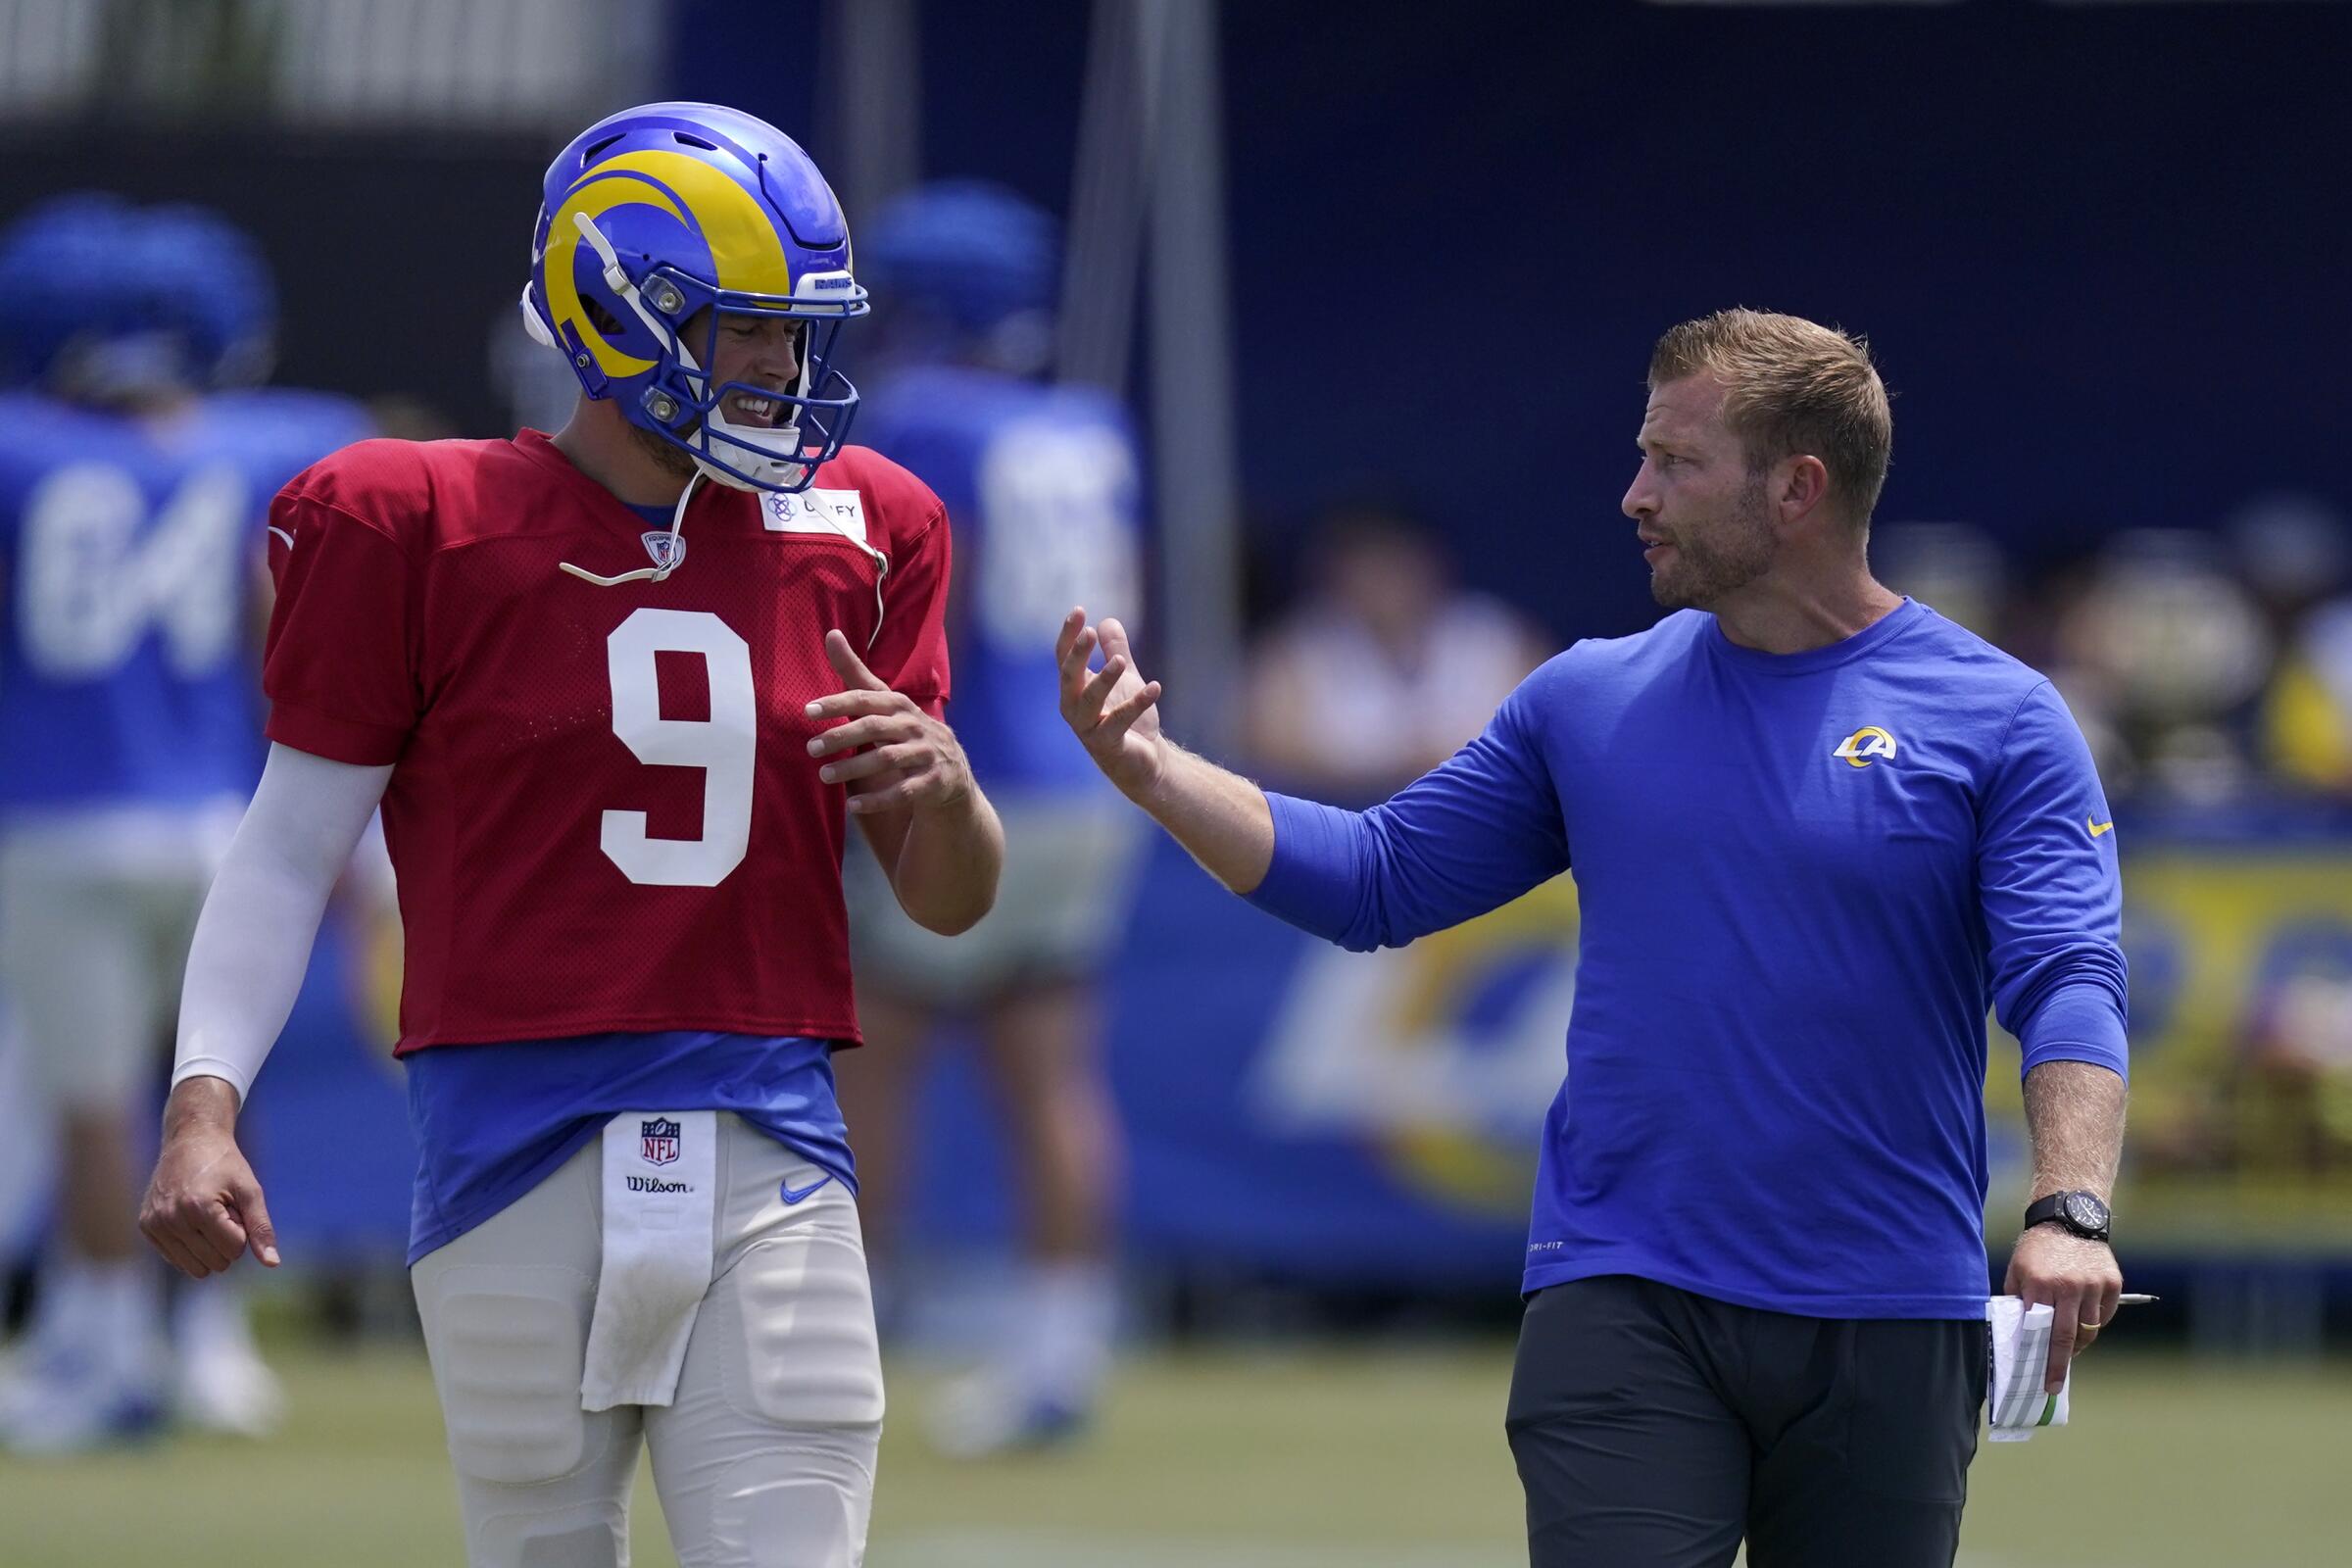 Rams coach Sean McVay, right, speaks with quarterback Matthew Stafford during practice.